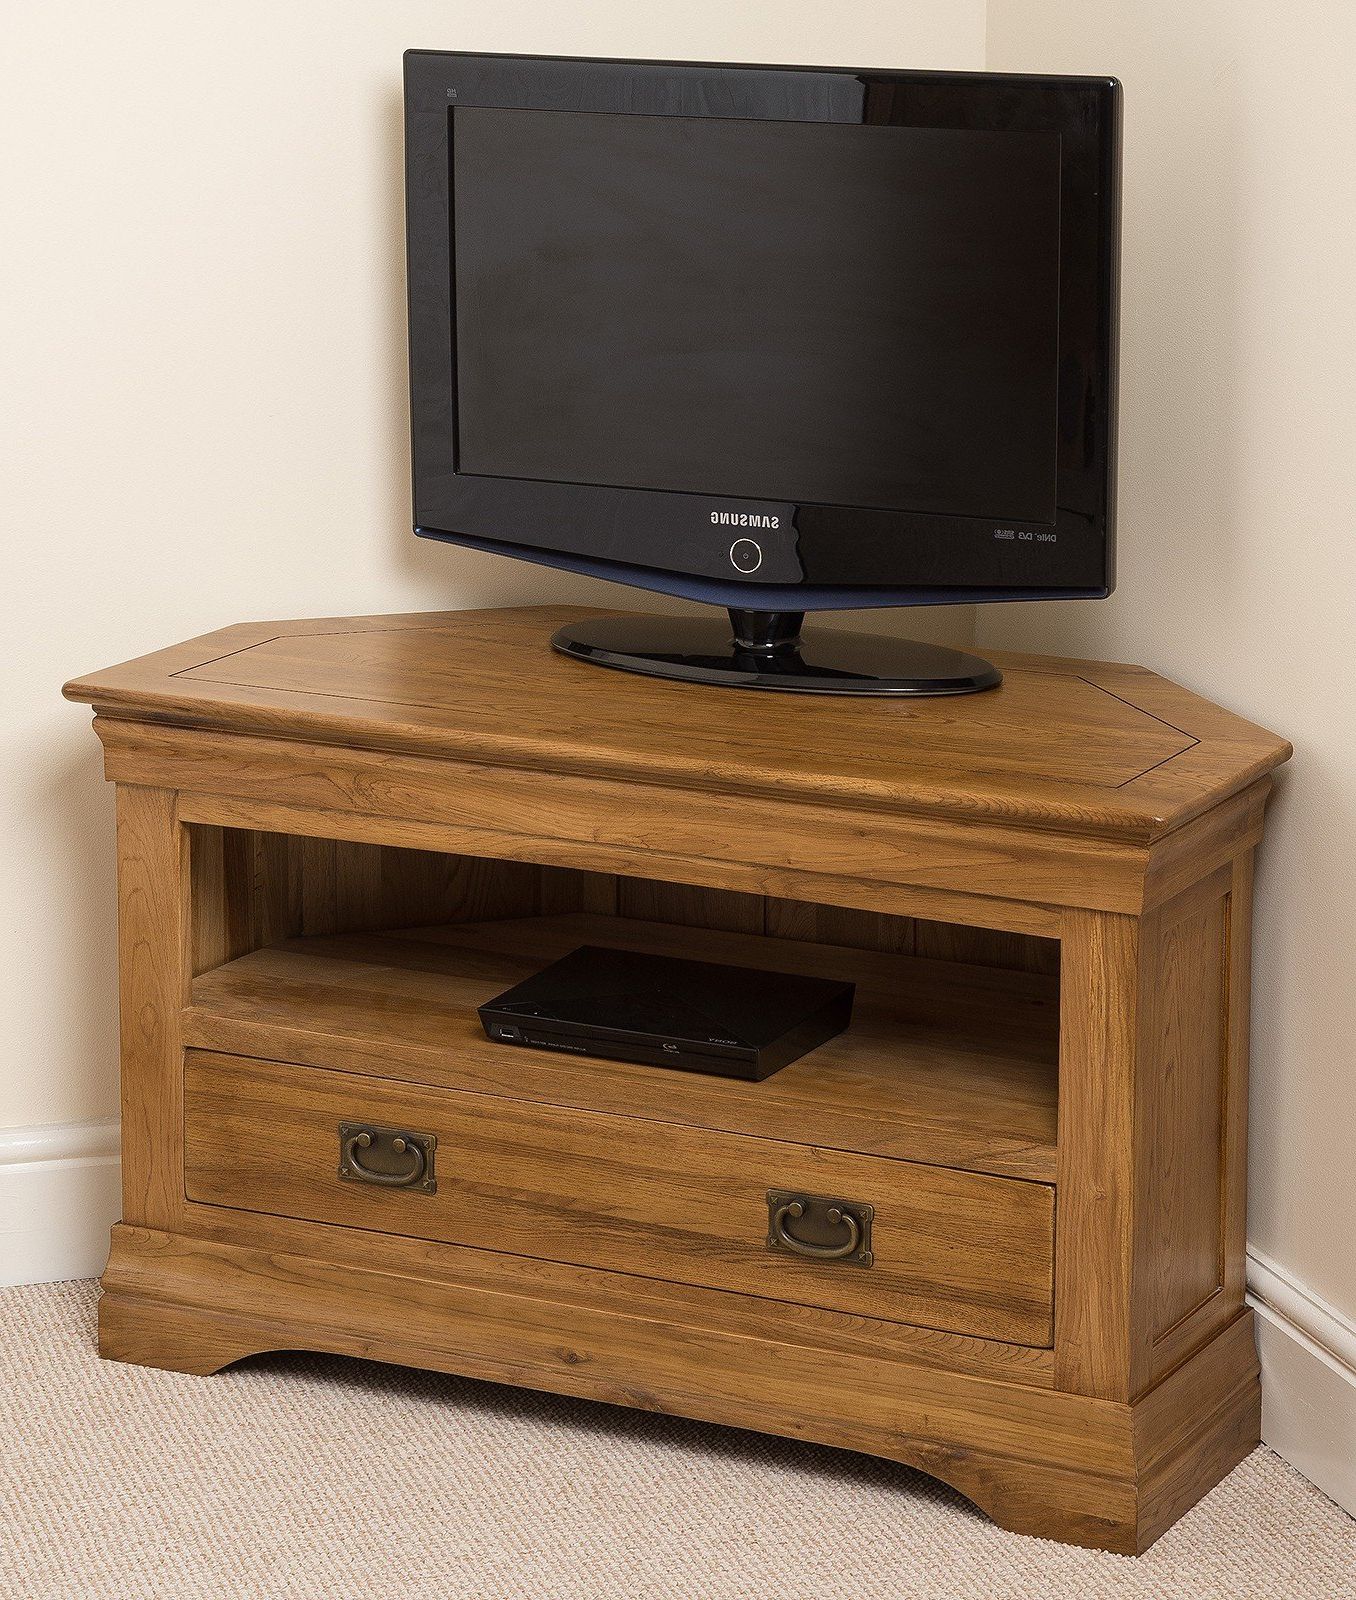 Solid Oak Corner Tv Cabinets Intended For Most Recently Released Solid Wood Corner Tv Stands You'll Love (View 9 of 20)